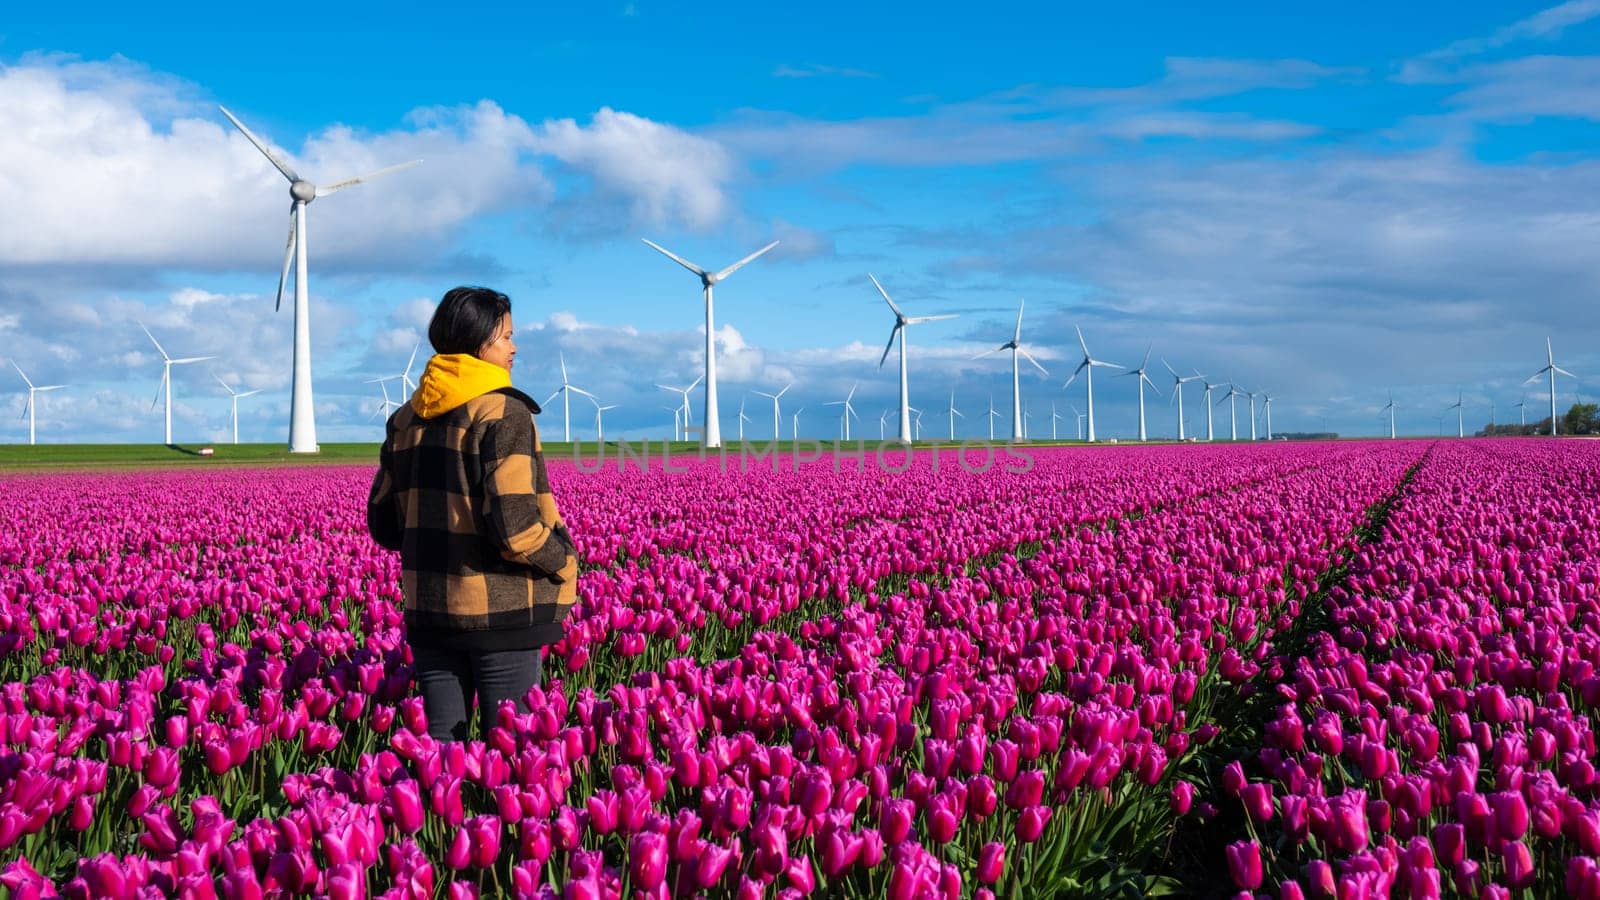 A man stands gracefully in a sea of purple tulips, surrounded by the vibrant colors of spring in the Netherlands by fokkebok